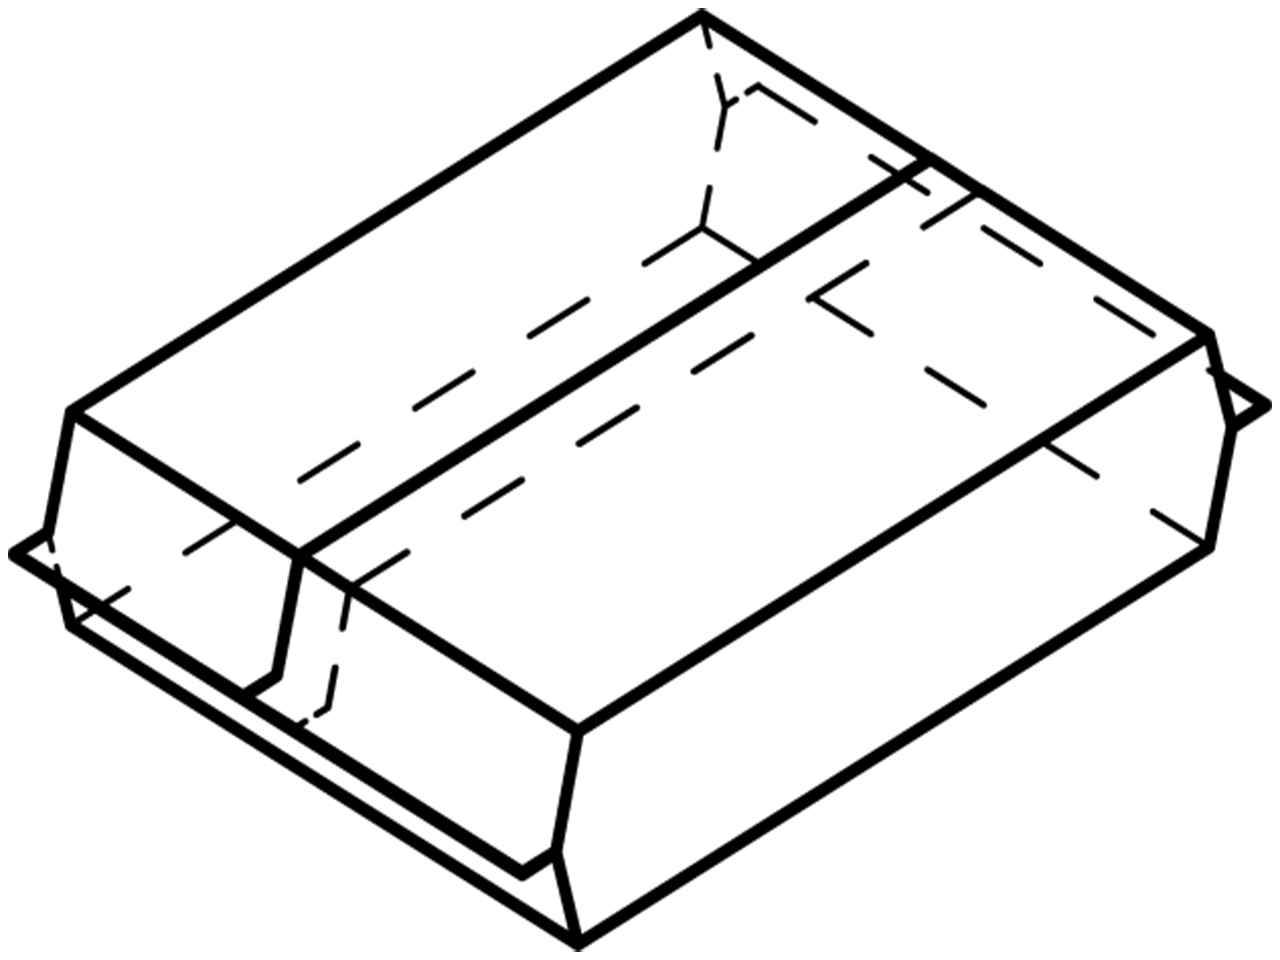 Illustration of the packaging type "two sides sewn, top overlap glued"